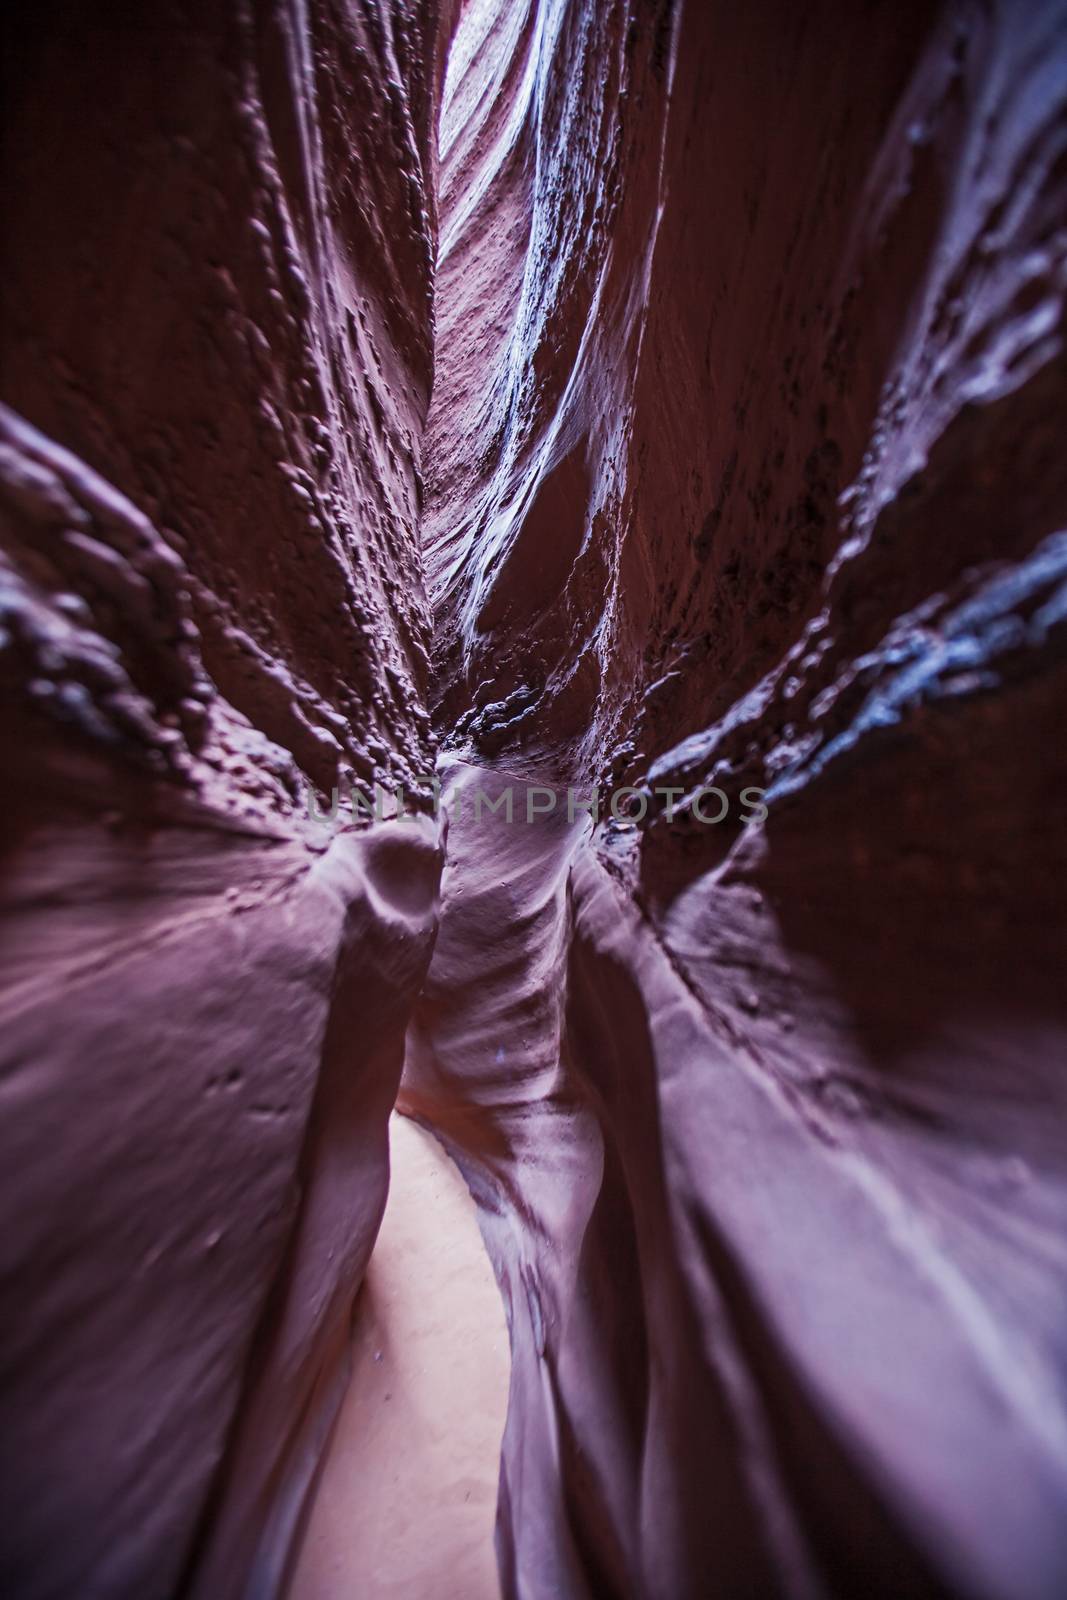 The Spooky slot canyon is one of several slot canyons in the vicinity of Escalante. UT.